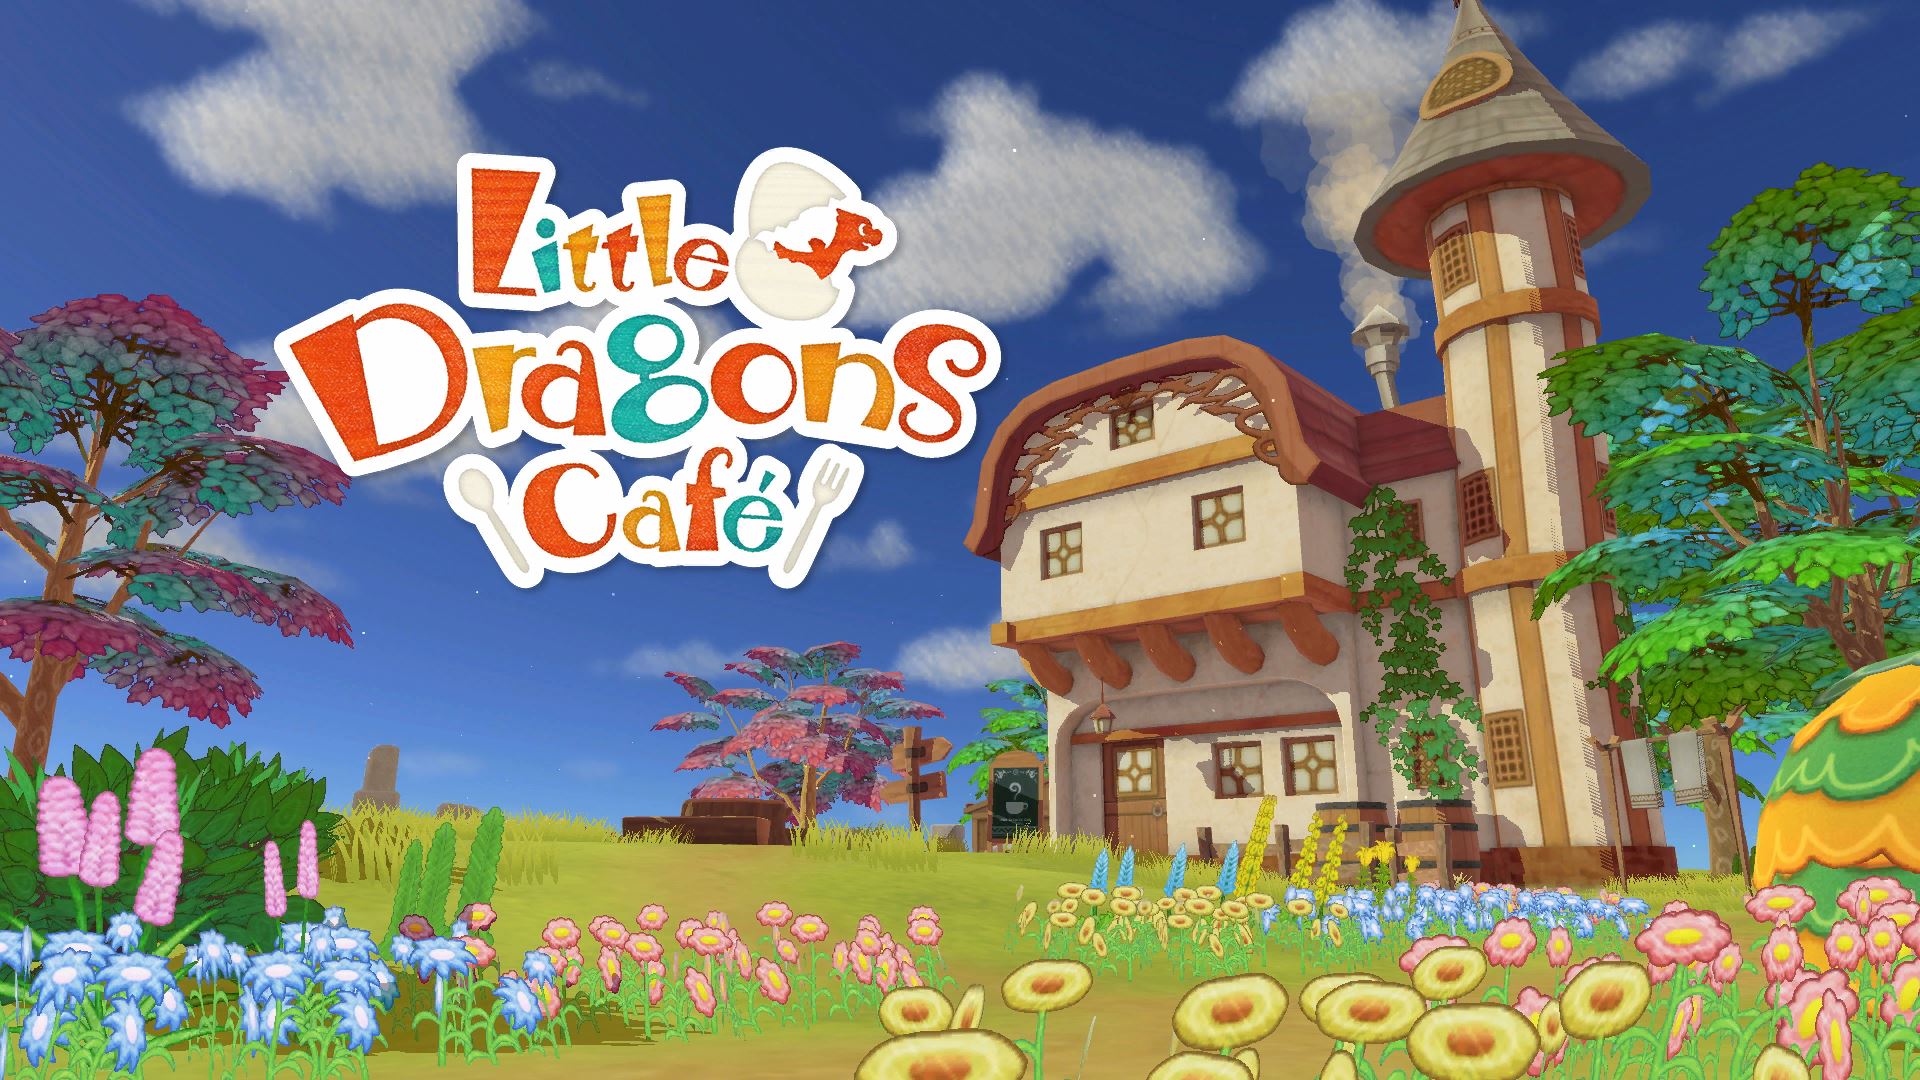 little-dragons-cafe-from-aksys-games-is-now-available-on-pc-after-debuting-on-ps4-and-nintendo